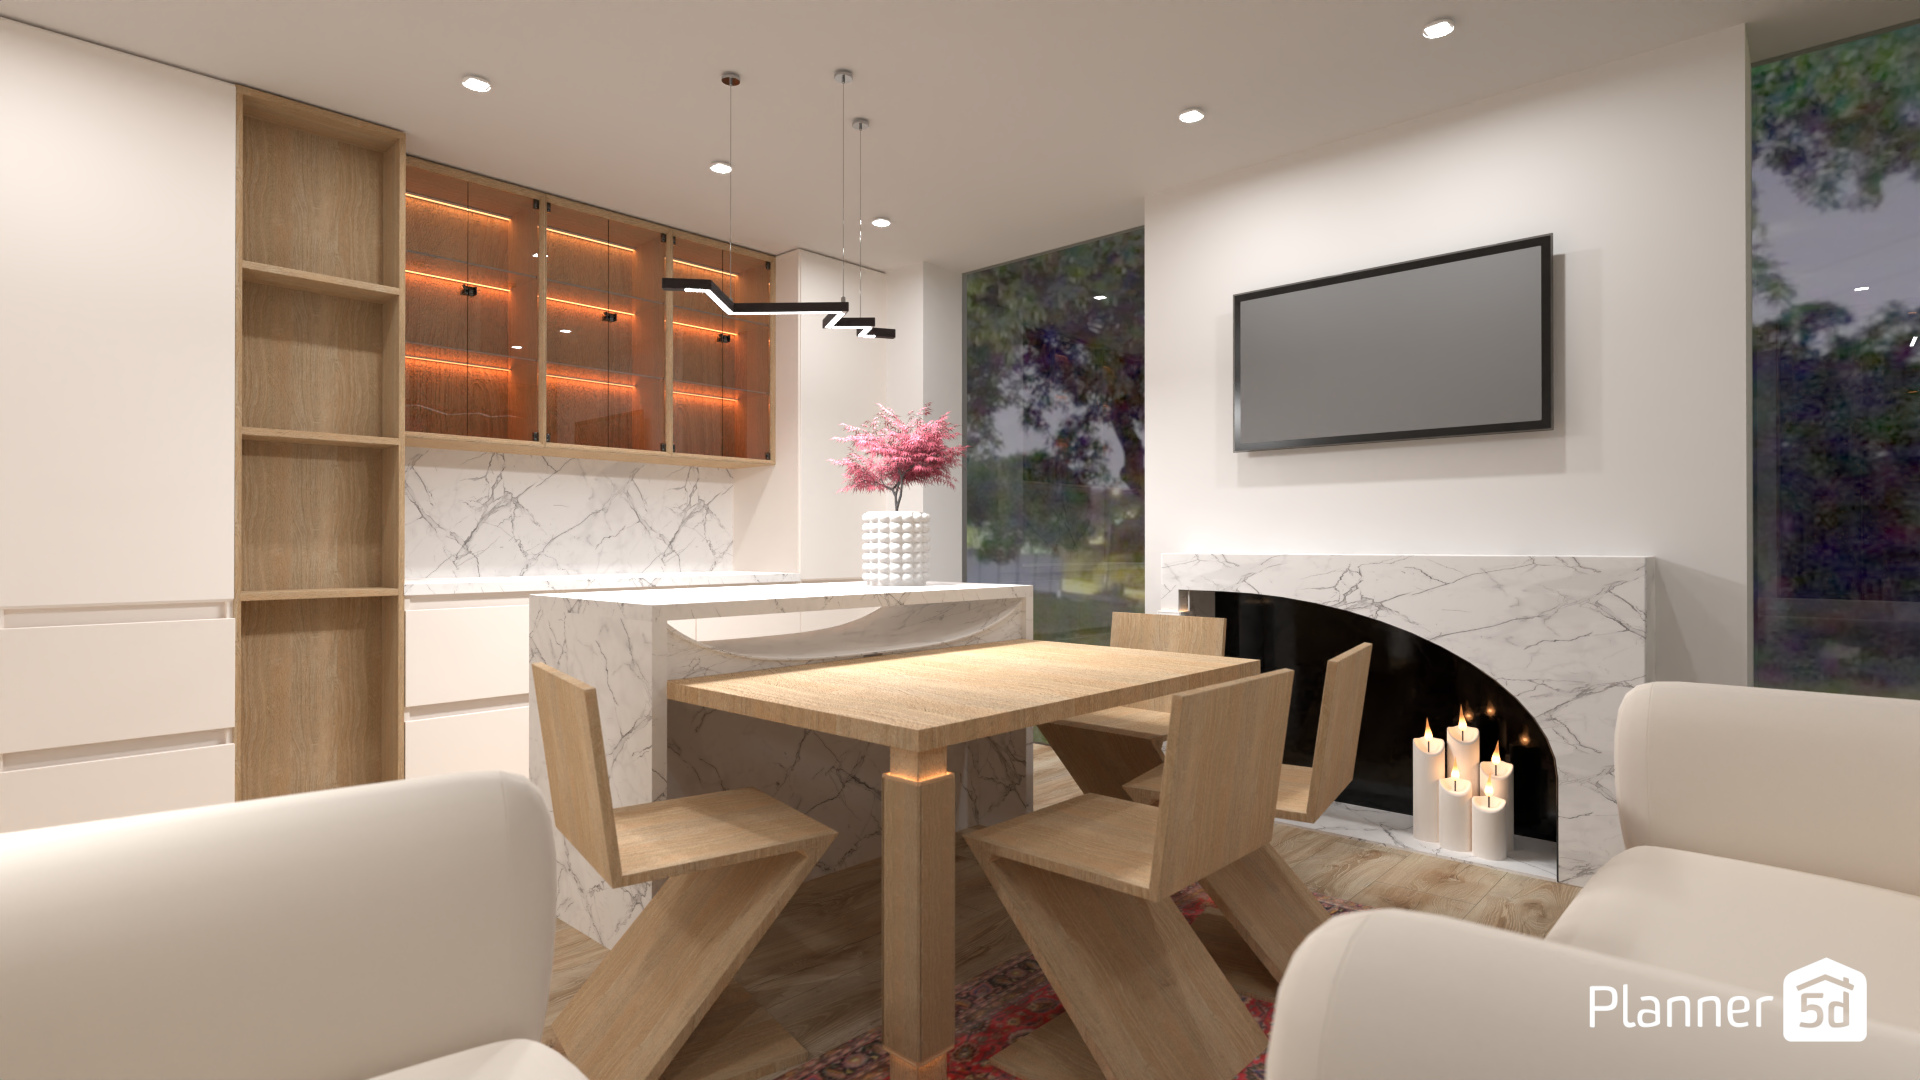 Kitchen island + dining table 20919154 by Darina Doncheva image